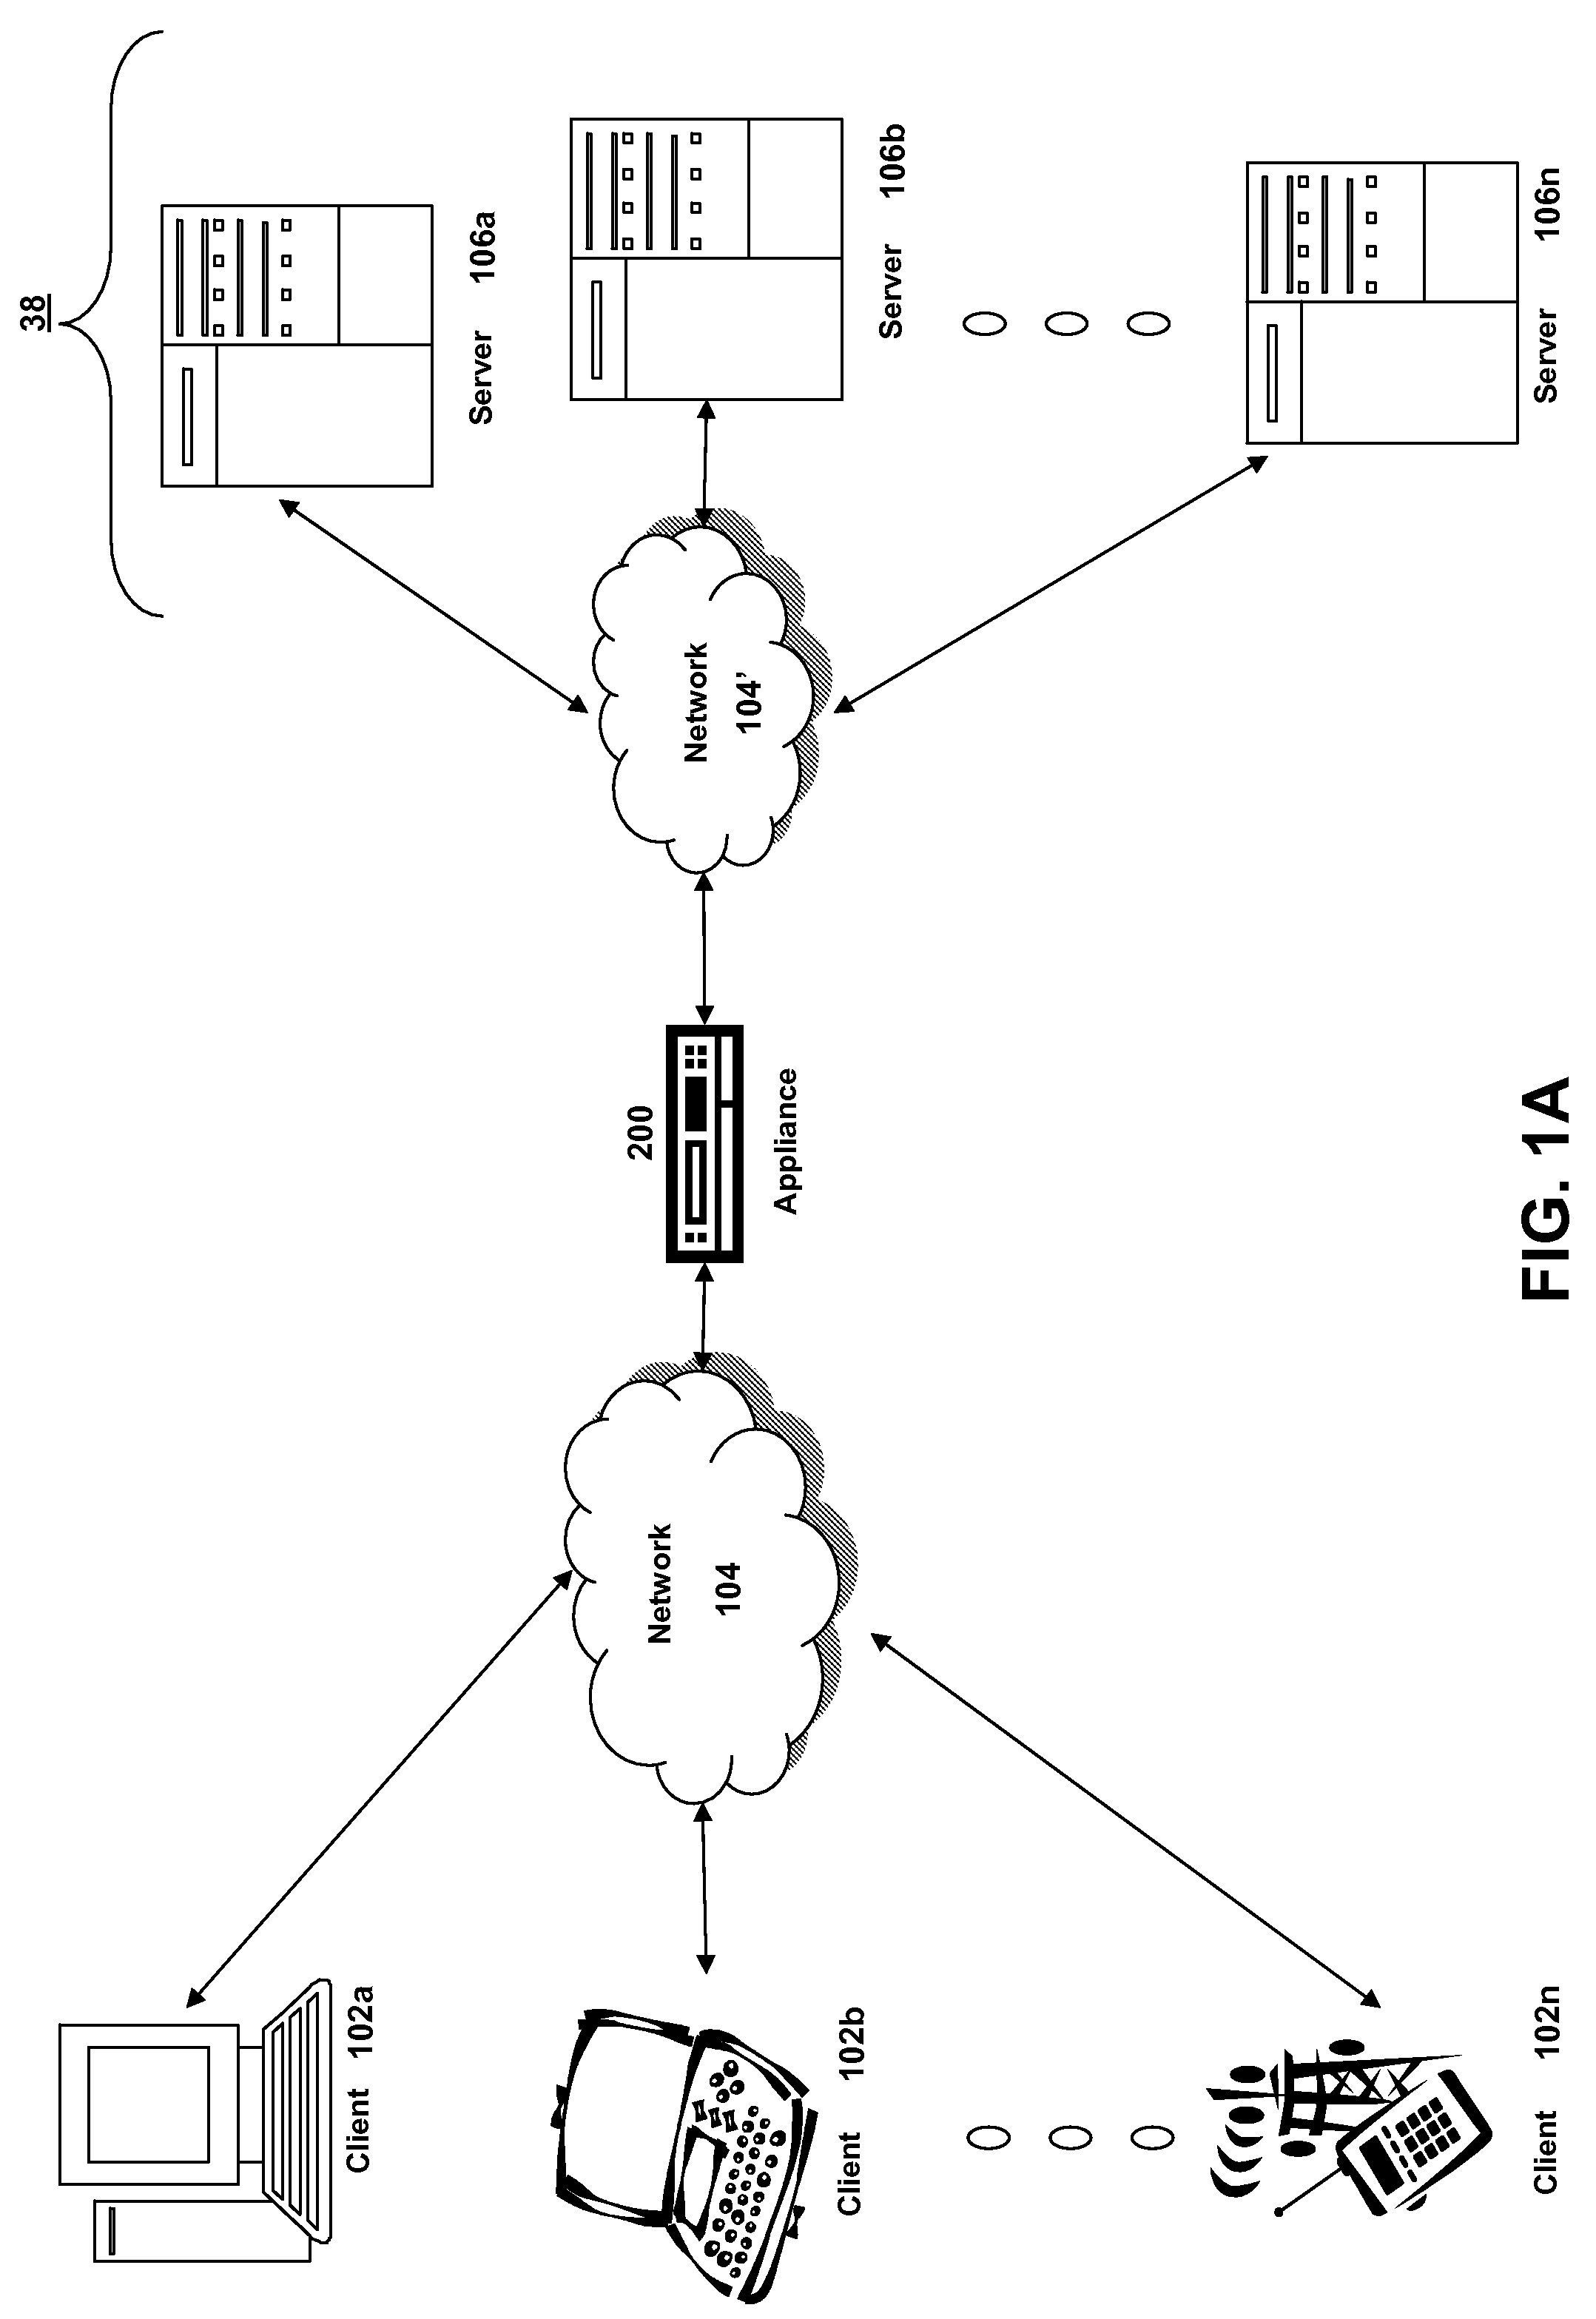 Systems and methods for GSLB remote service monitoring